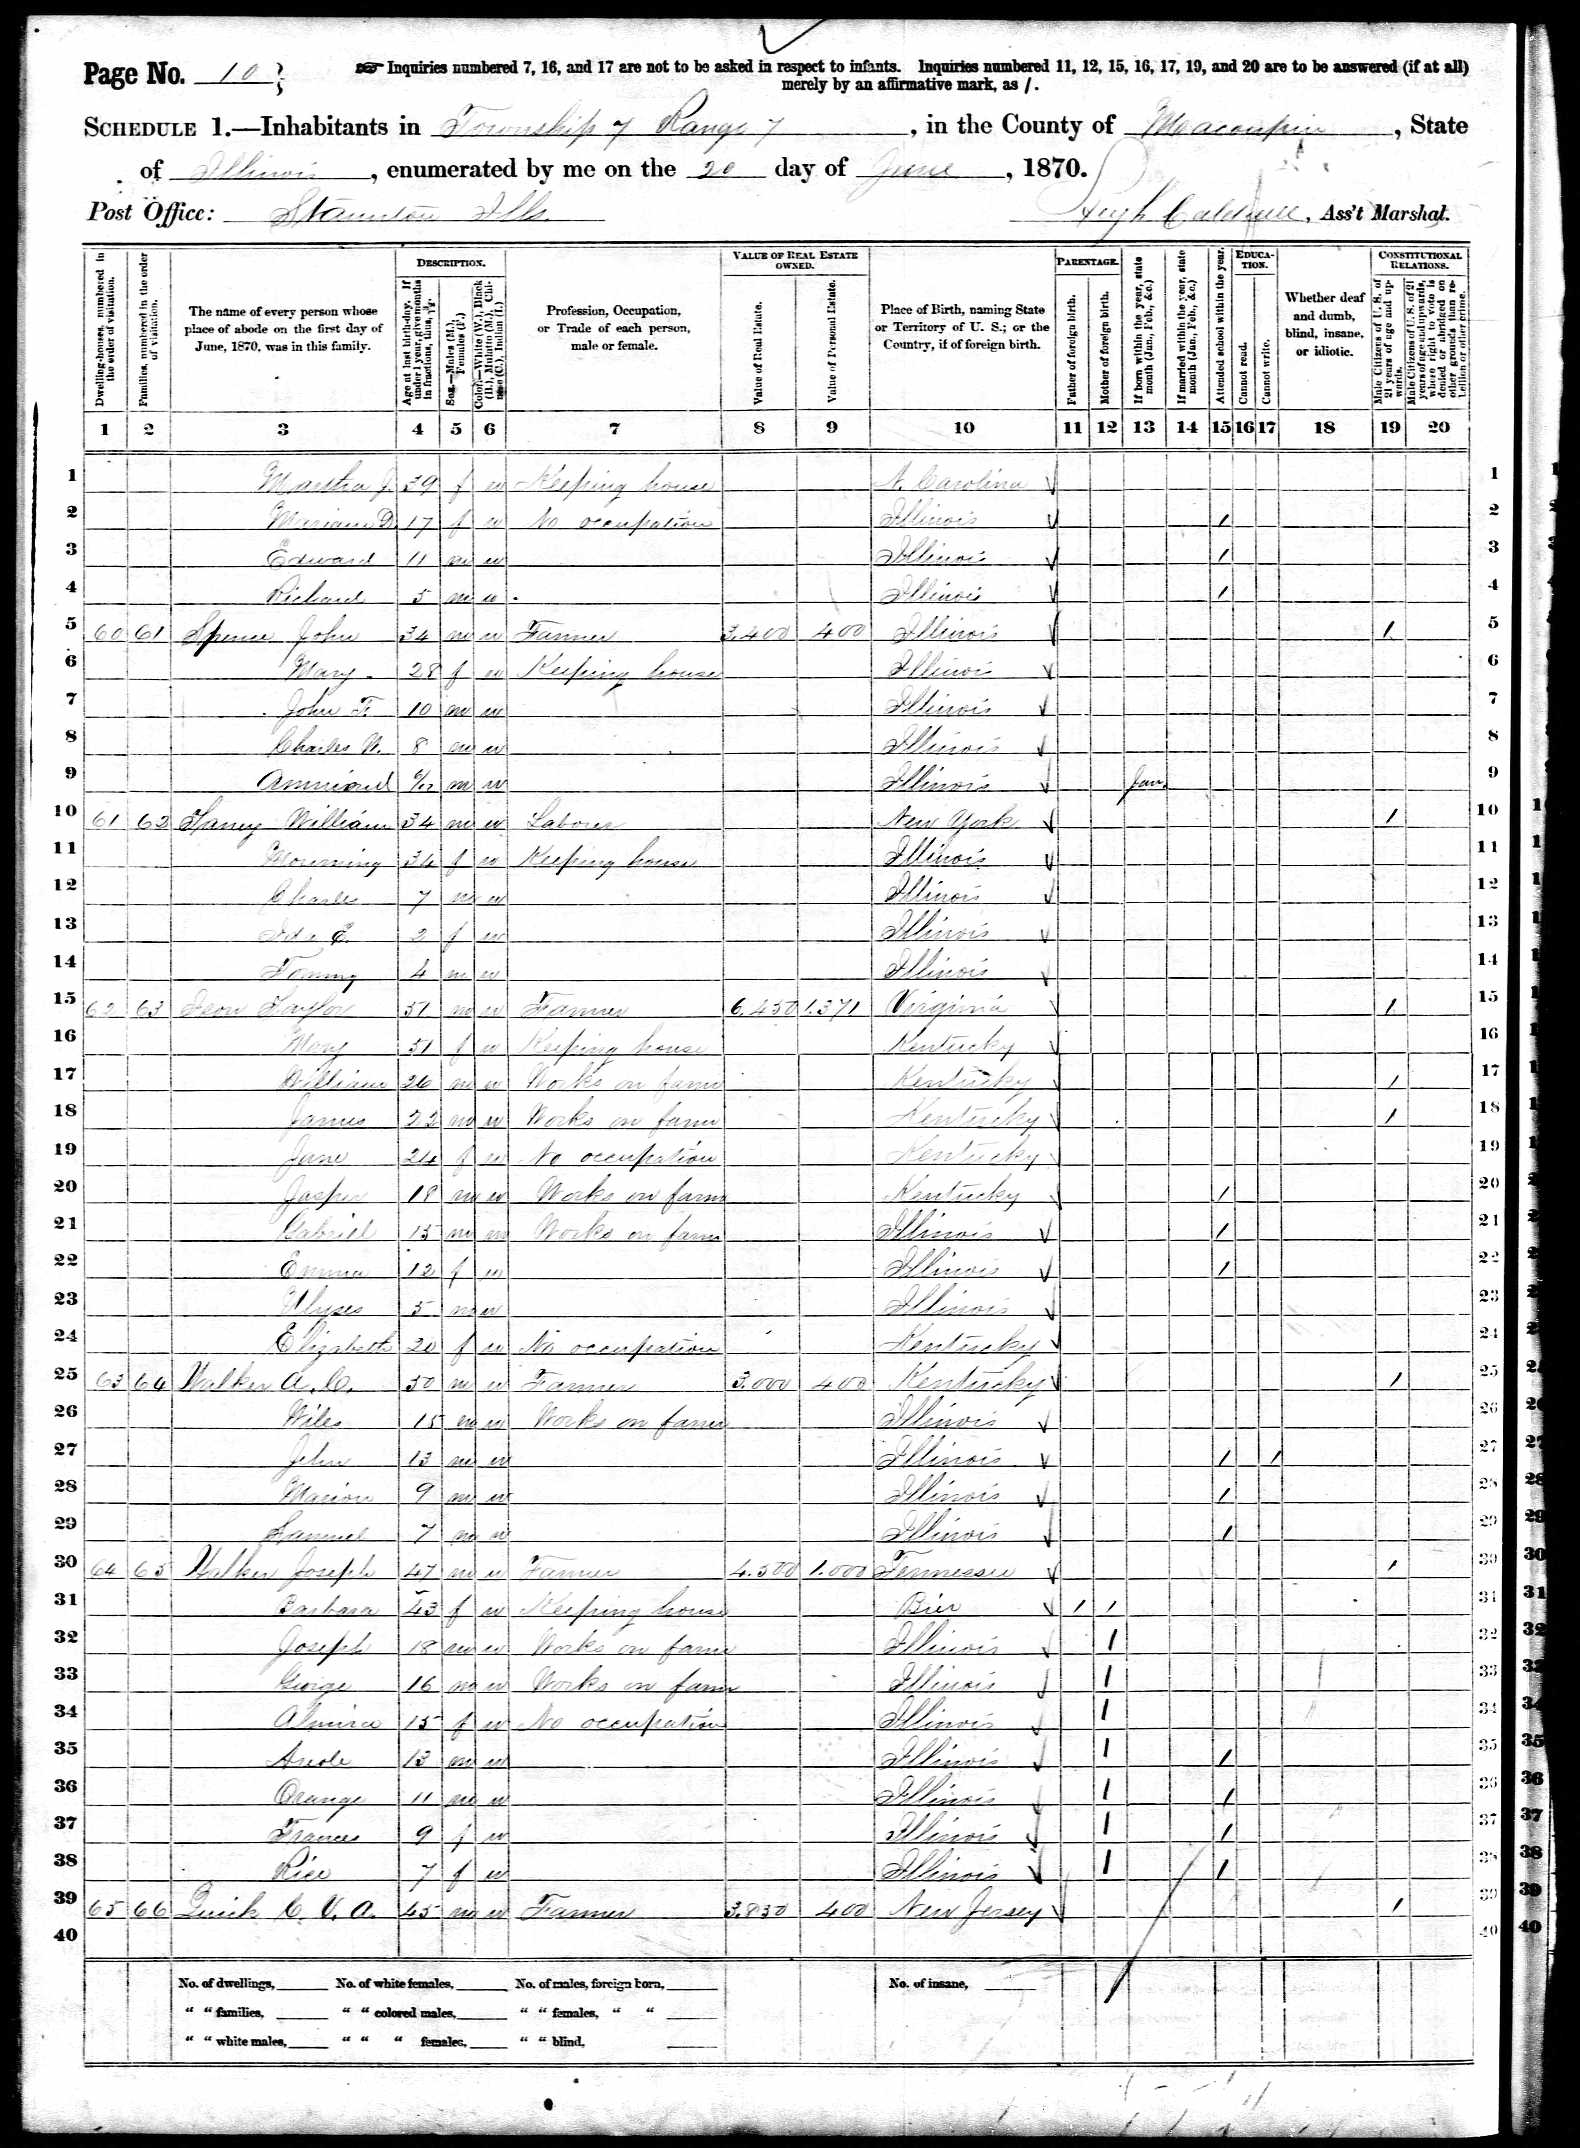 Archalus C. Walker, 1870 Macoupin County, illinois, census